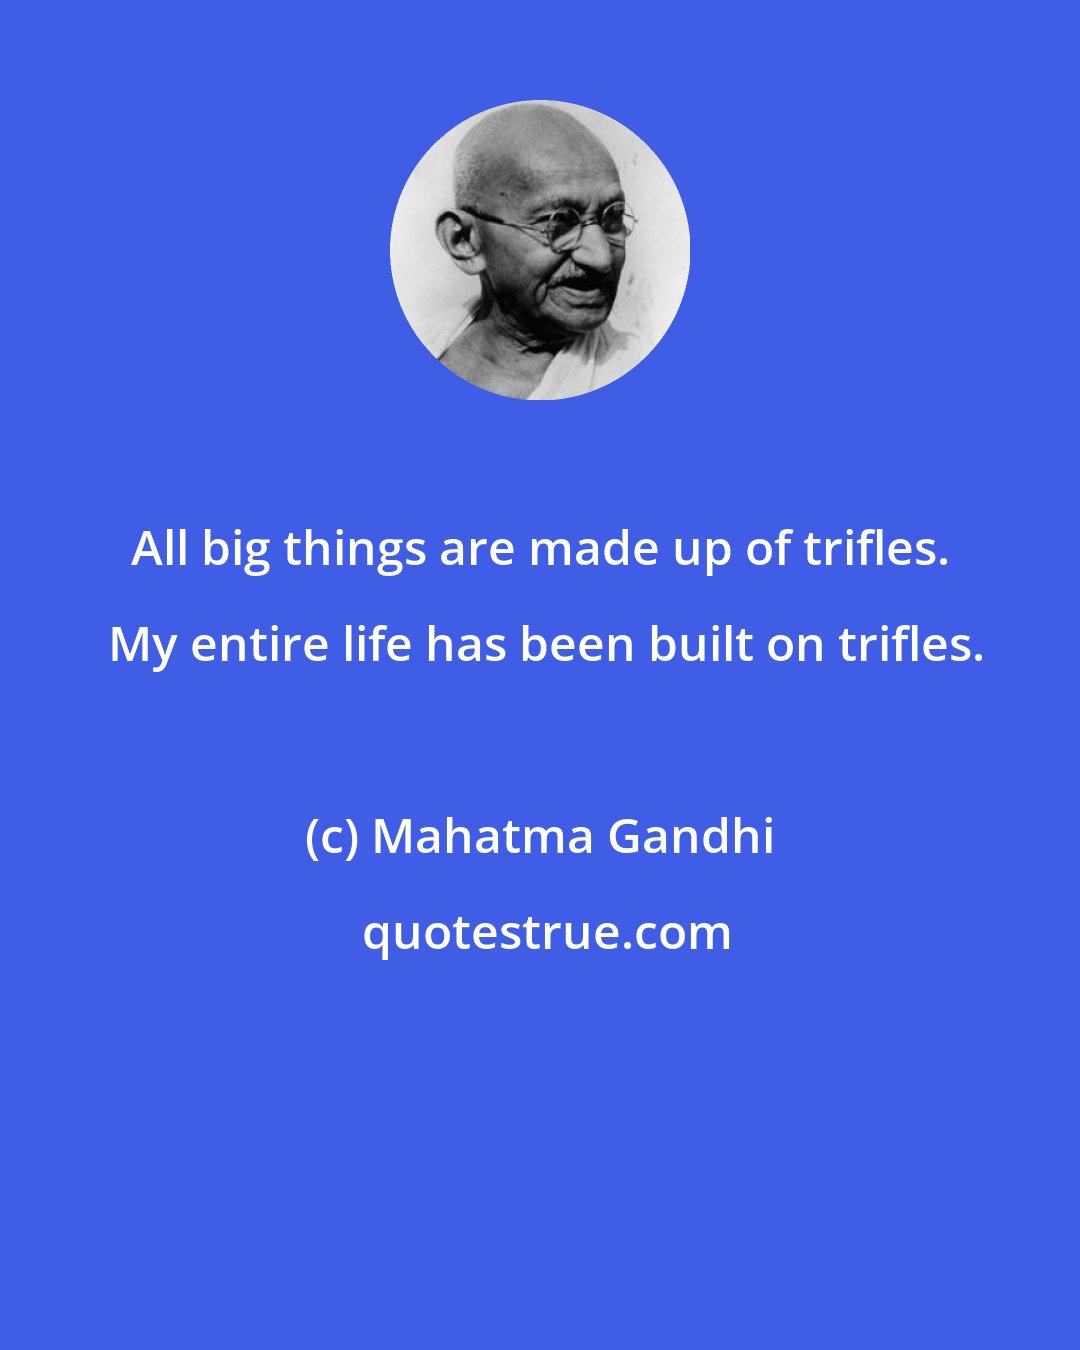 Mahatma Gandhi: All big things are made up of trifles.  My entire life has been built on trifles.